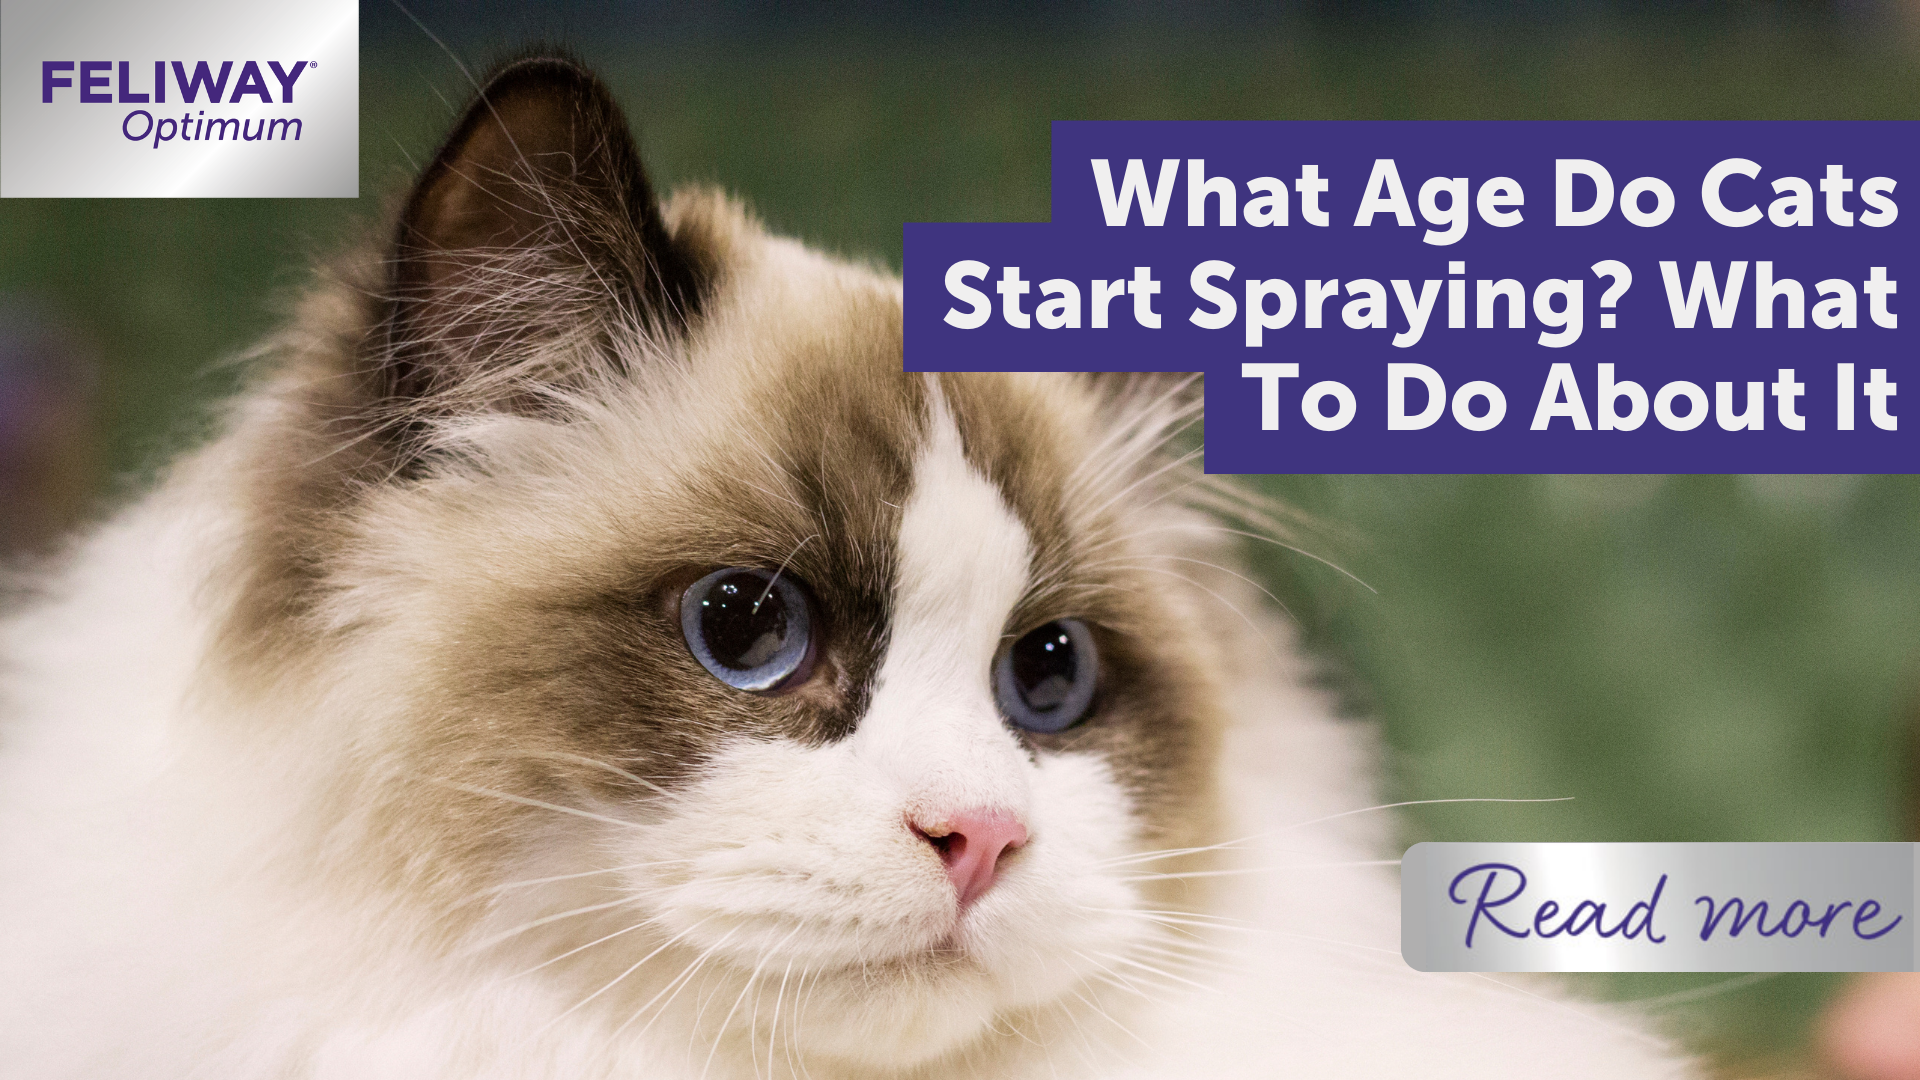 What Age Do Cats Start Spraying? What To Do About It